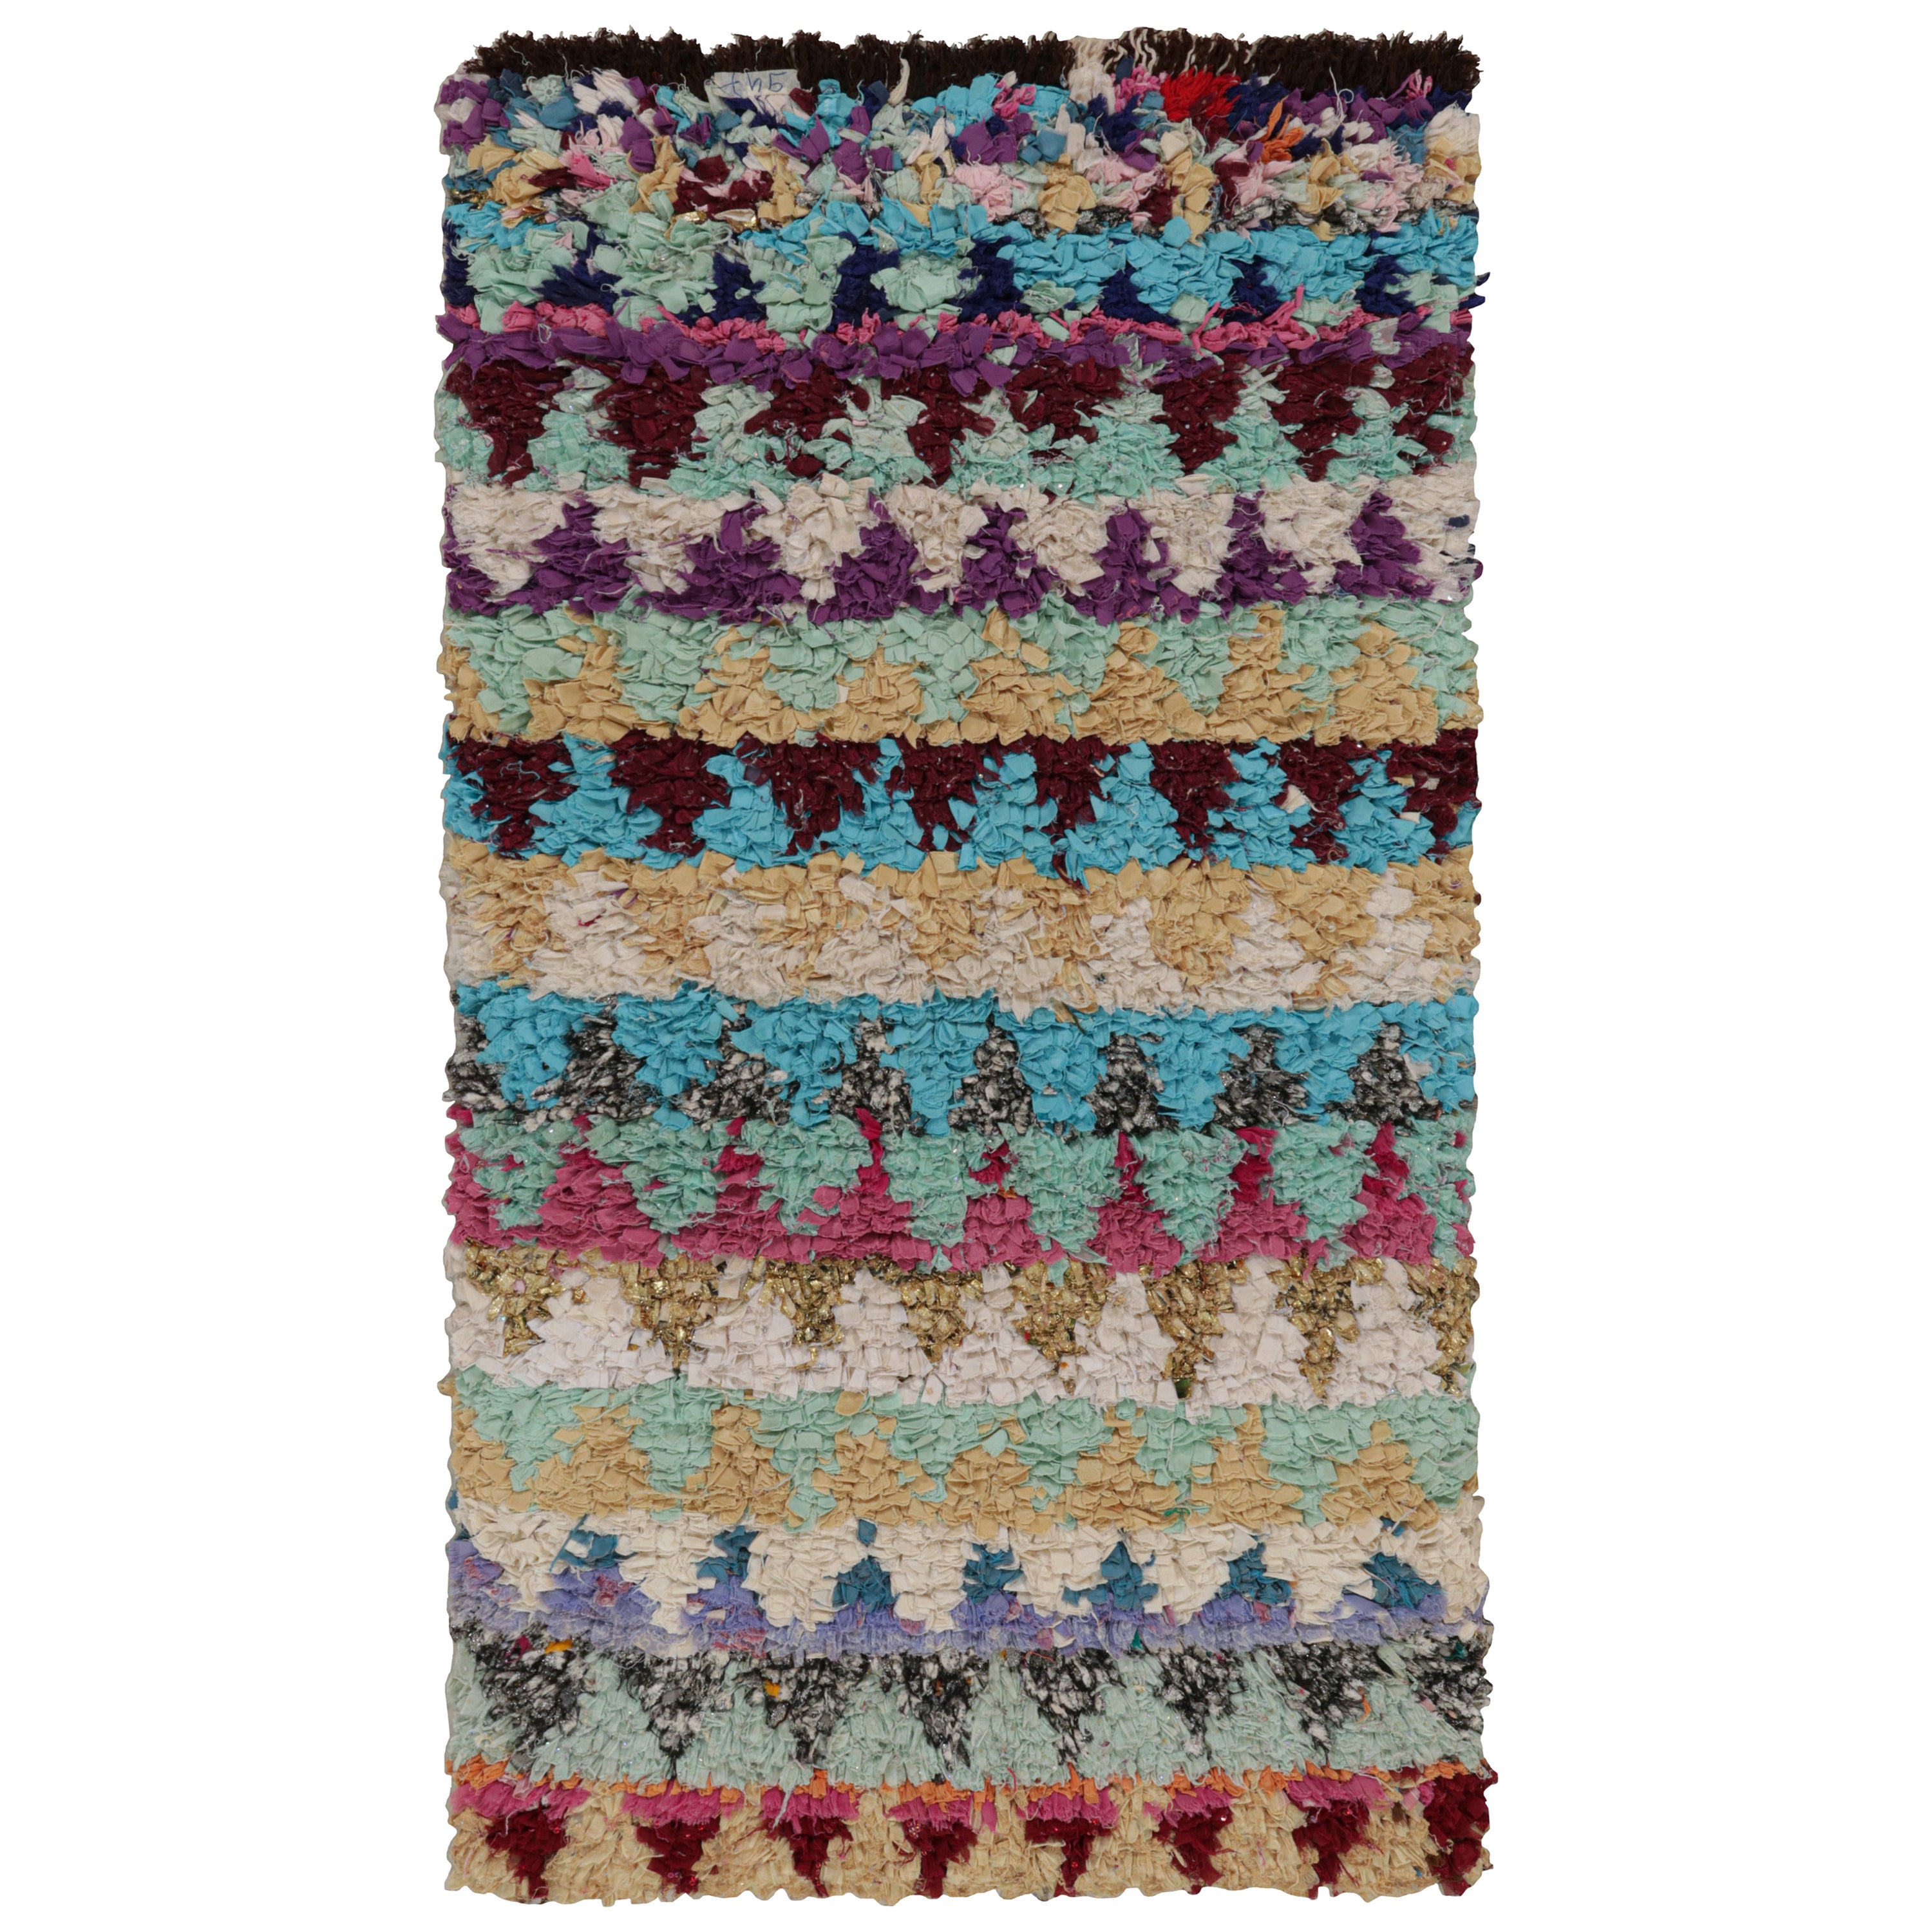 Vintage Azilal Moroccan Boucherouite Rug, with Chevron Patterns from Rug & Kilim For Sale